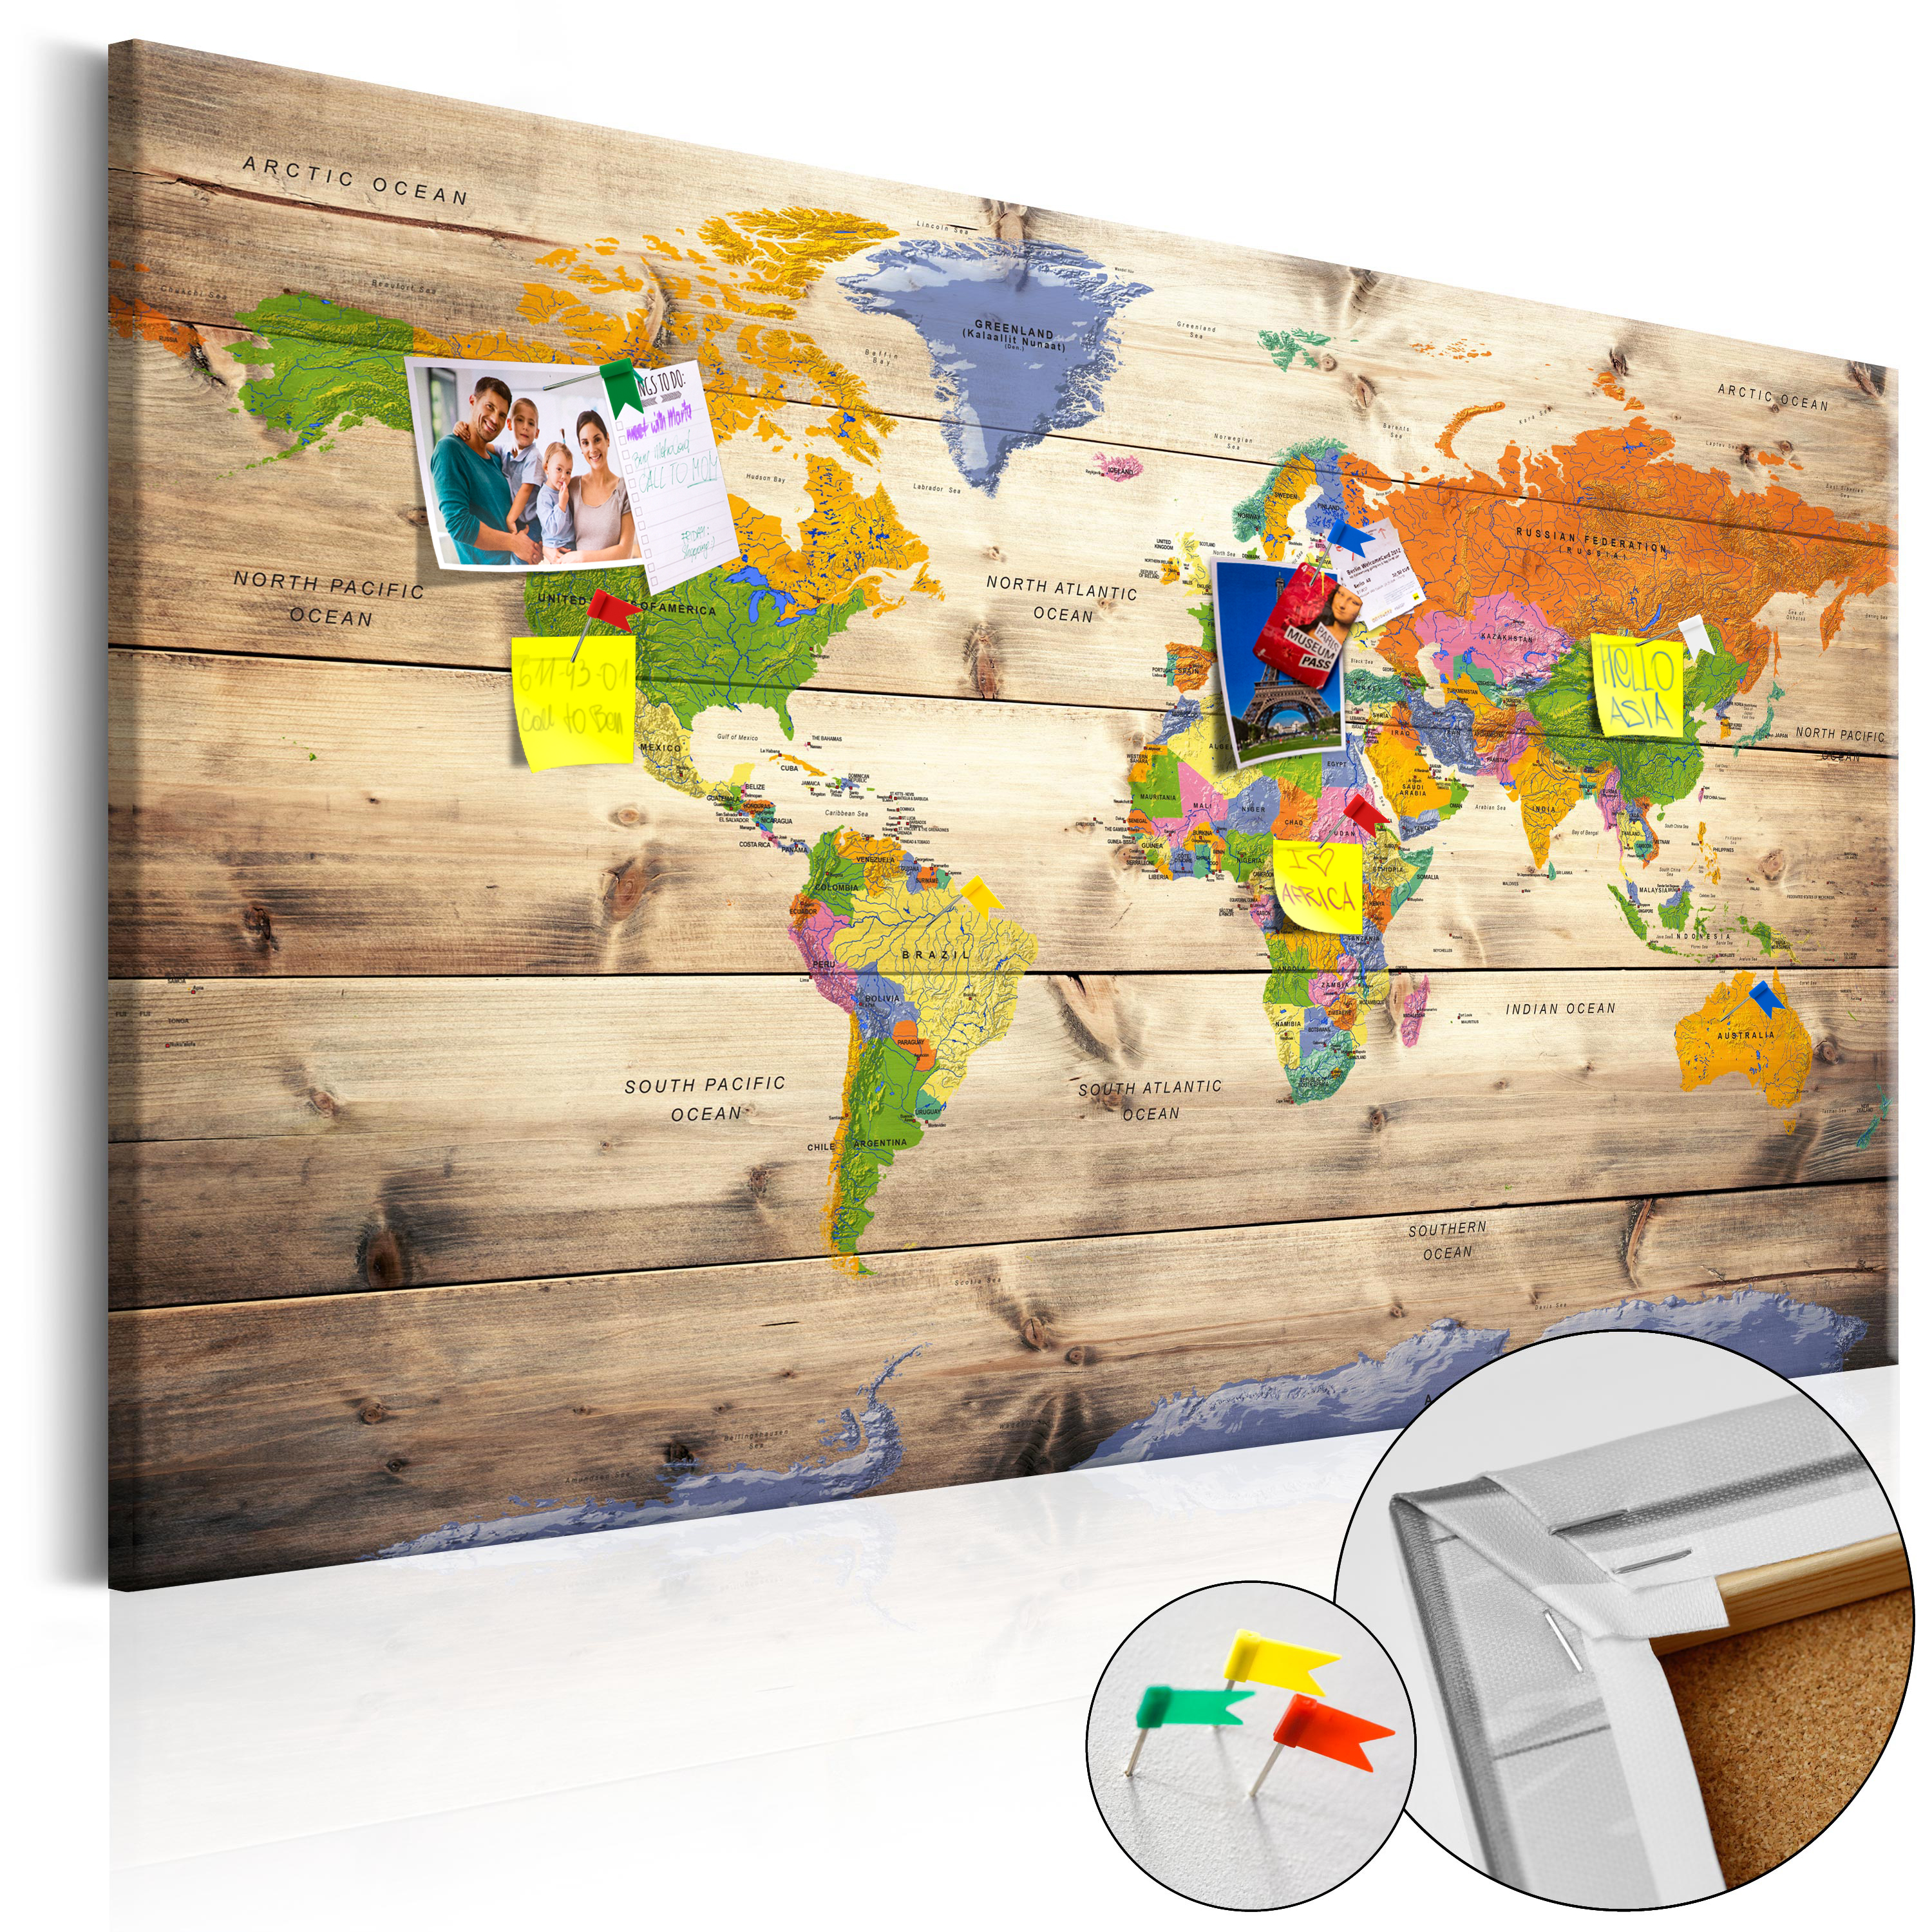 Decorative Pinboard - Map on wood: Colourful Travels [Cork Map] - 60x40